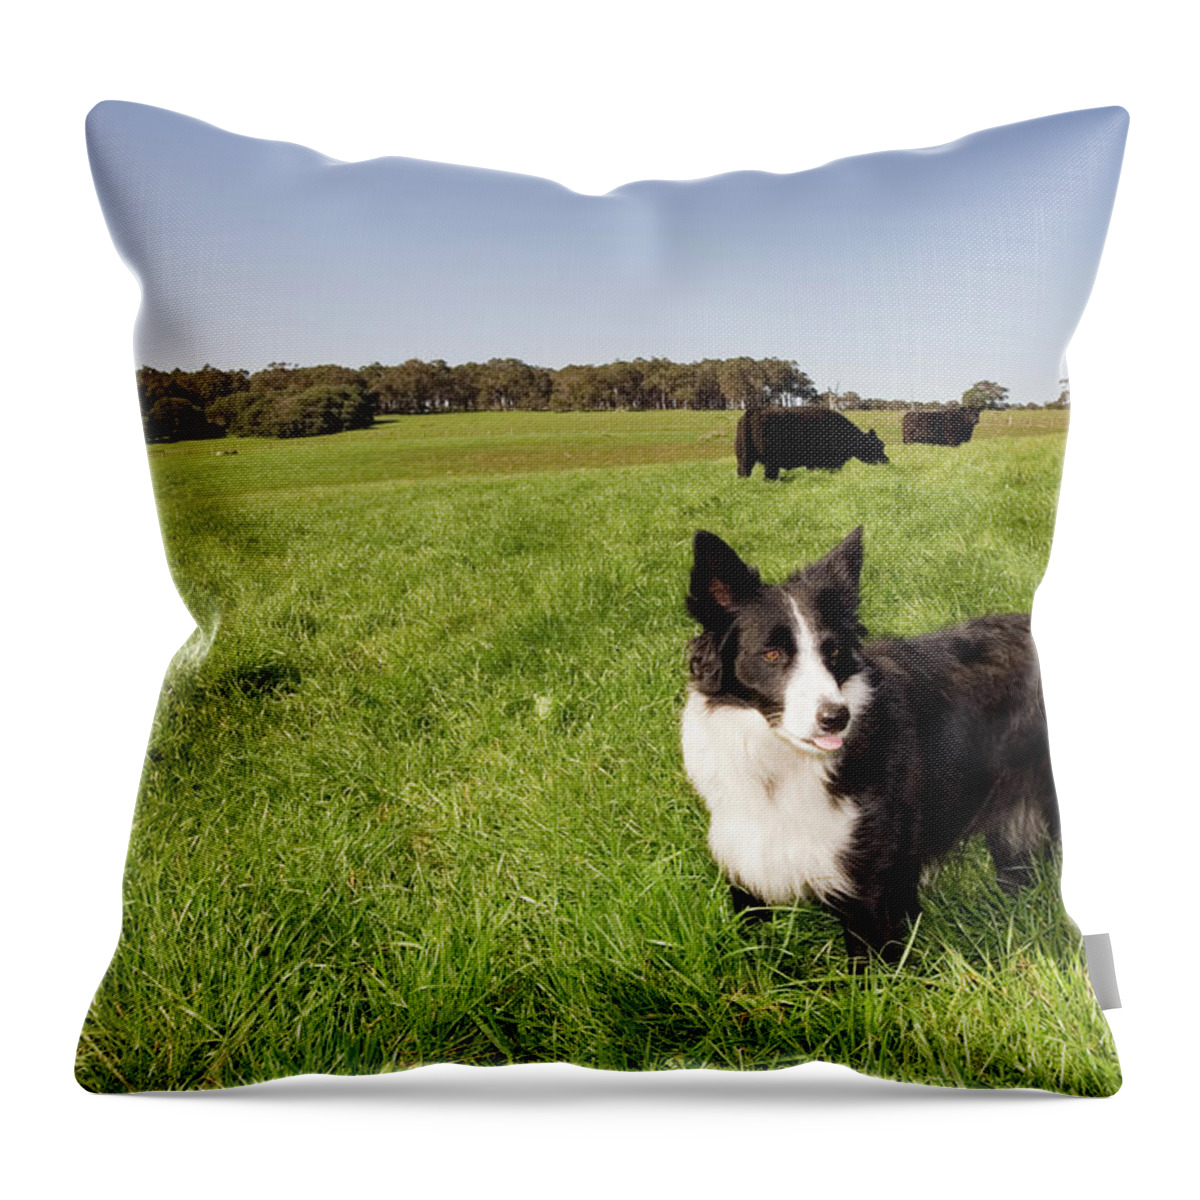 Pets Throw Pillow featuring the photograph Farm Dog by Tap10